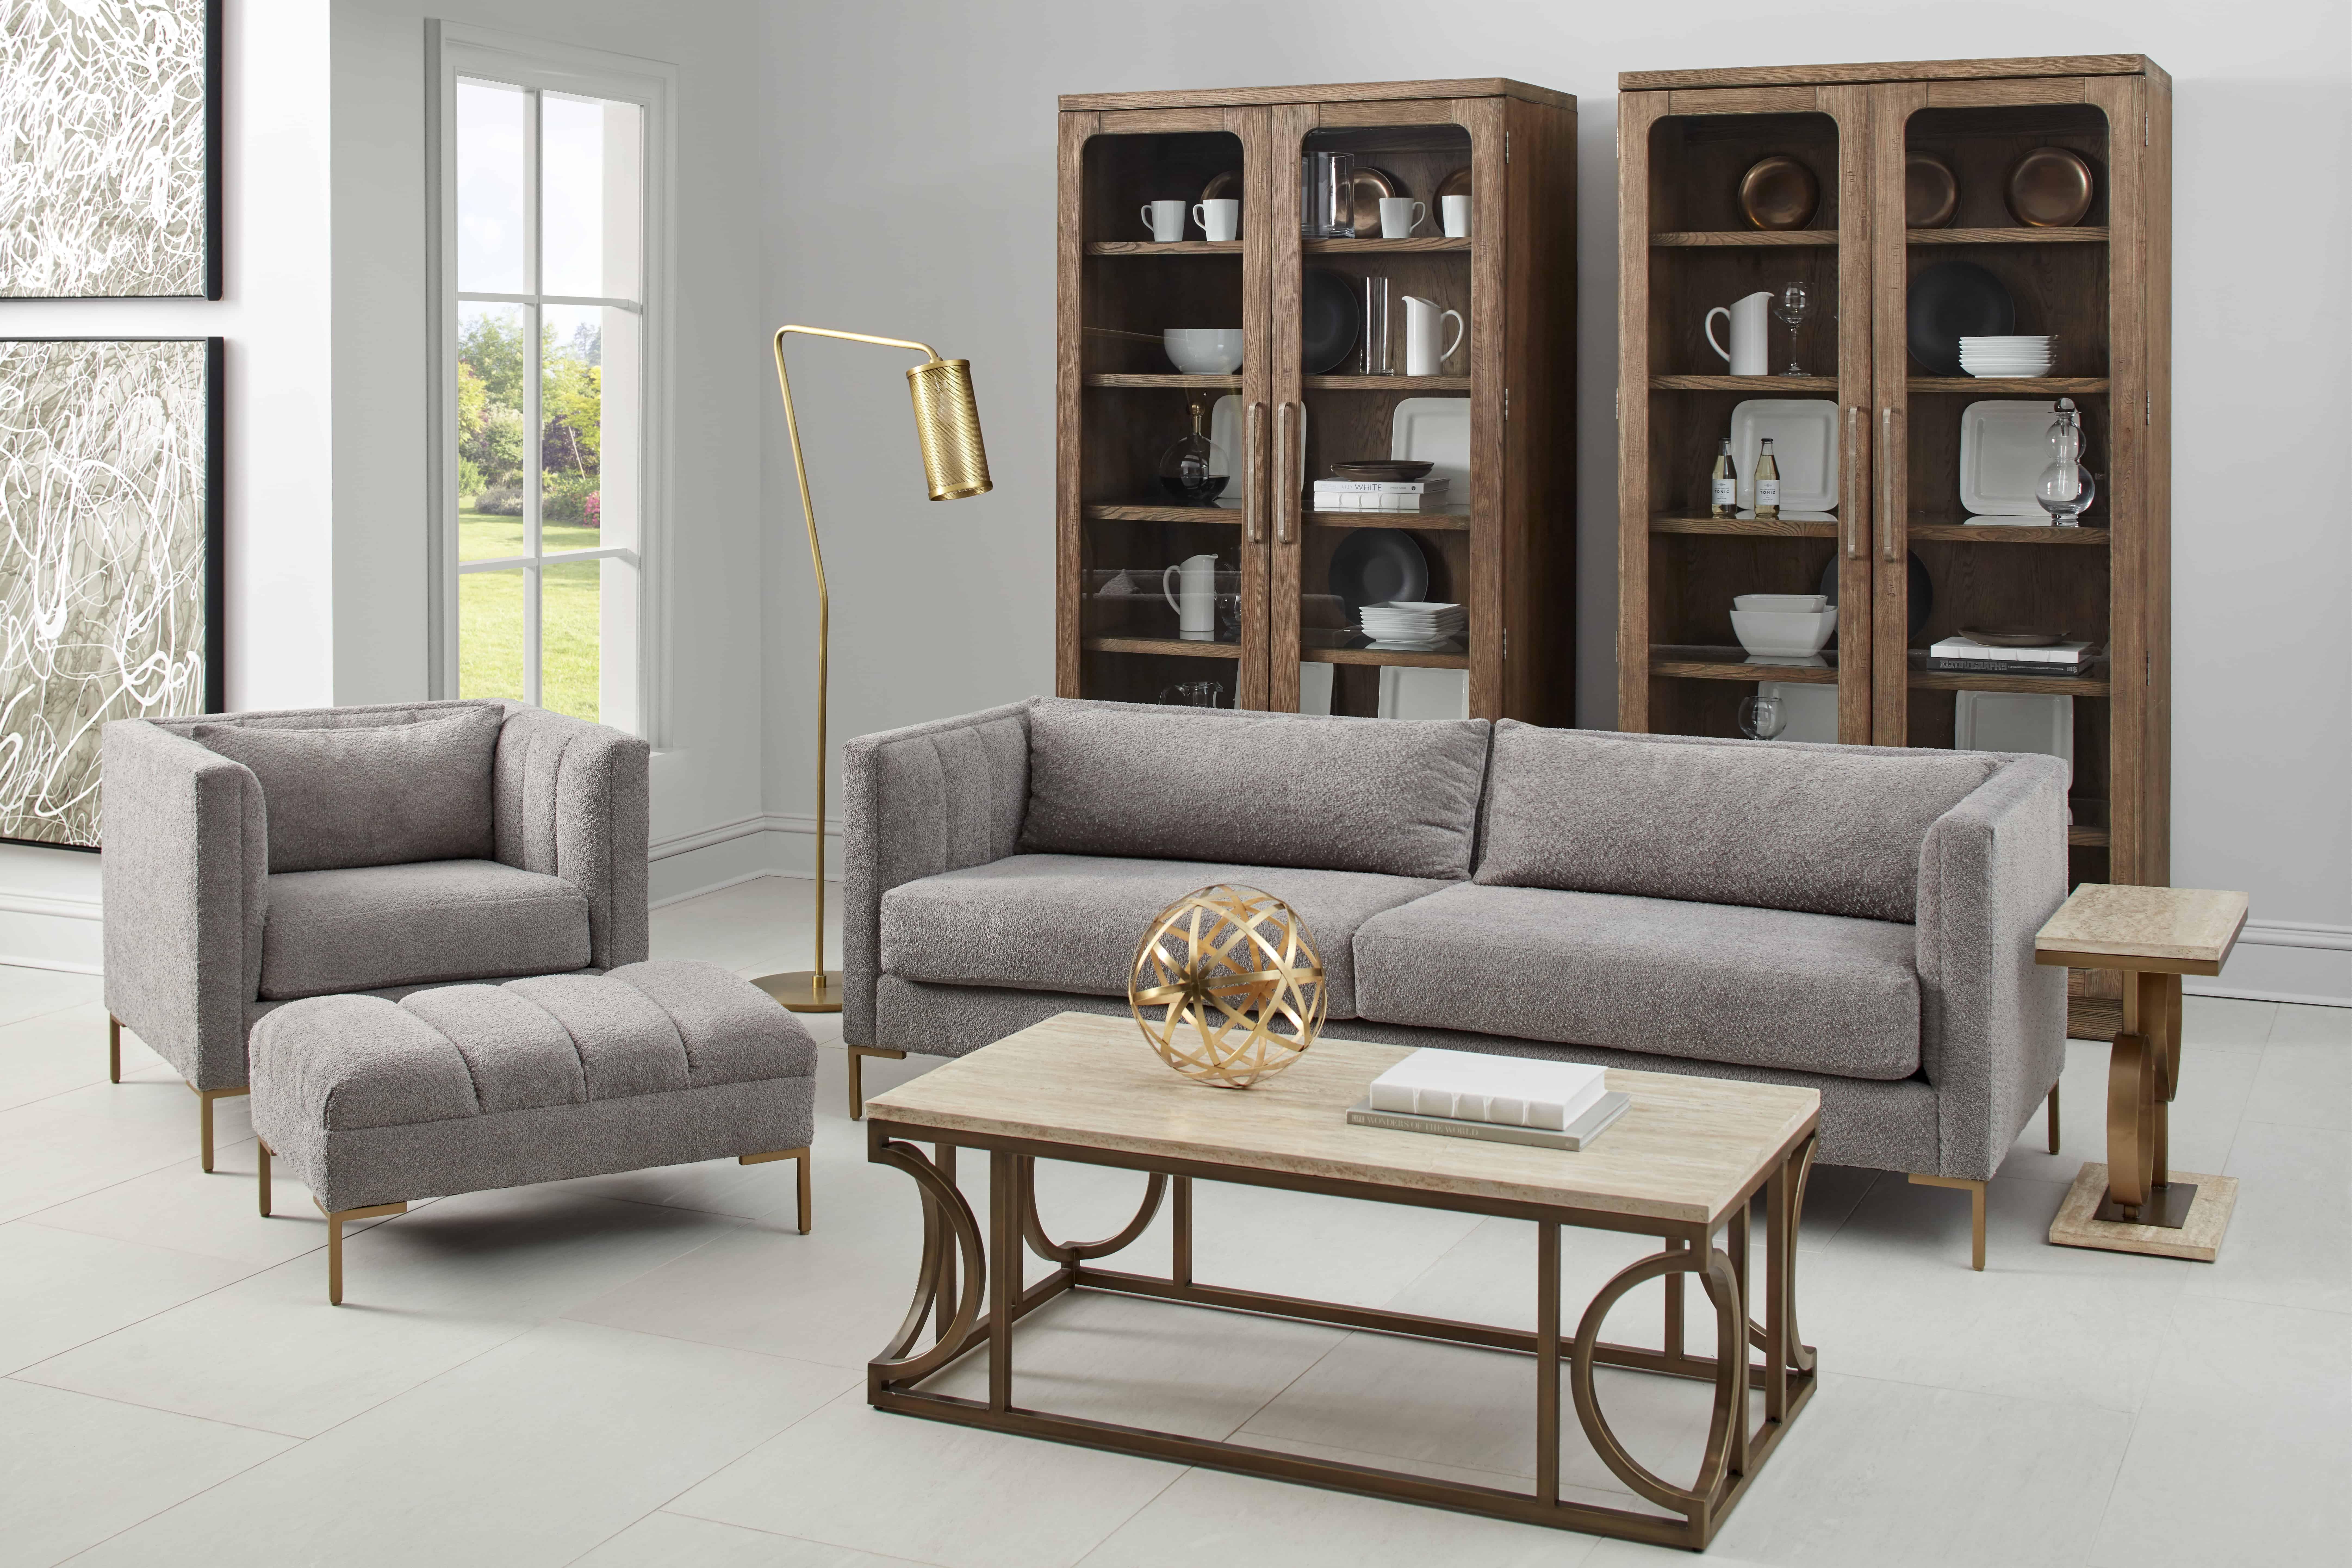 Contemporary, Modern Sofa Set 772501-5026F3 Set 772501-5026F3-Set-3 in Pewter Fabric